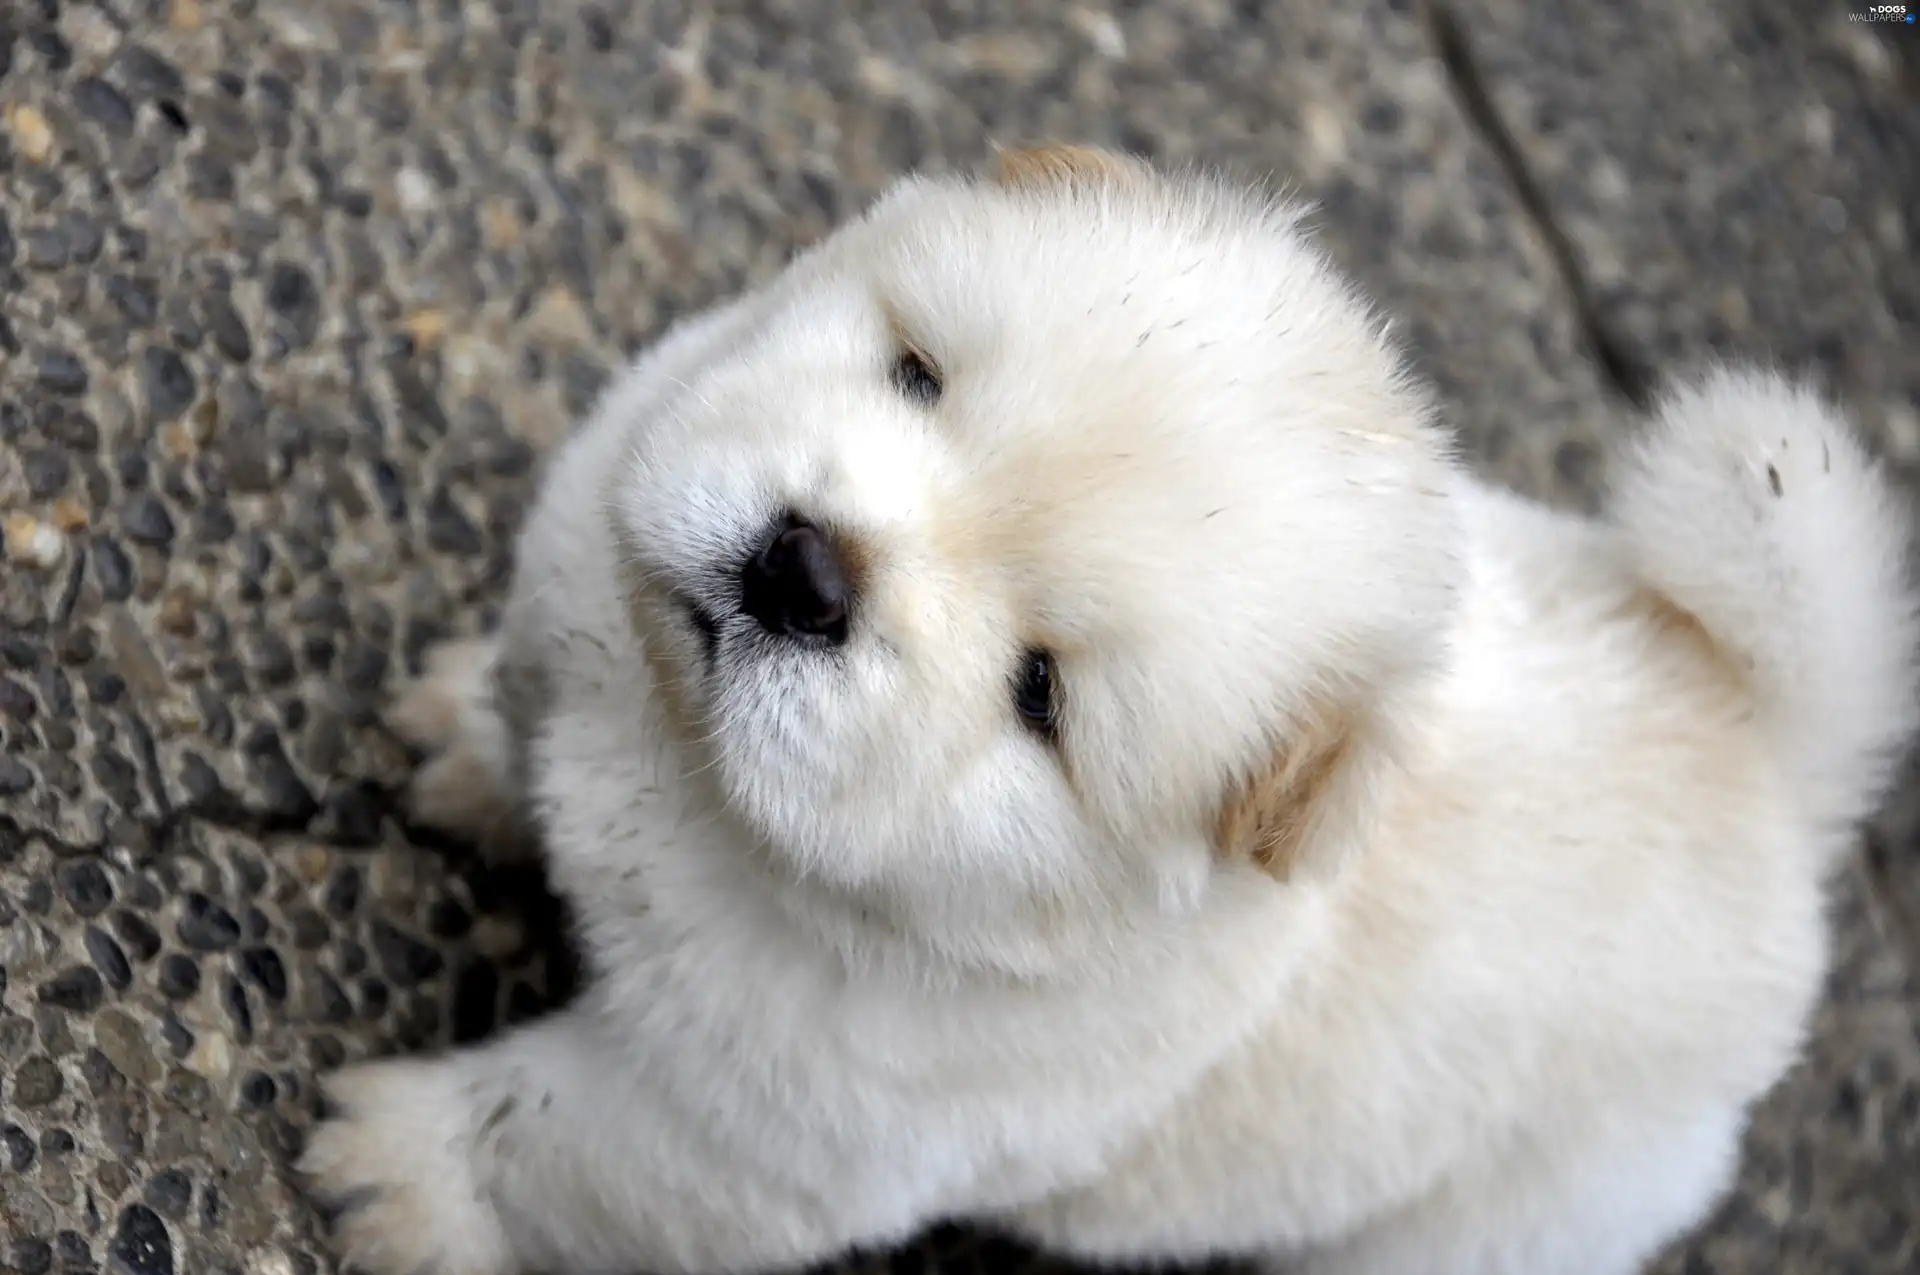 Puppy, Chow chow, dog